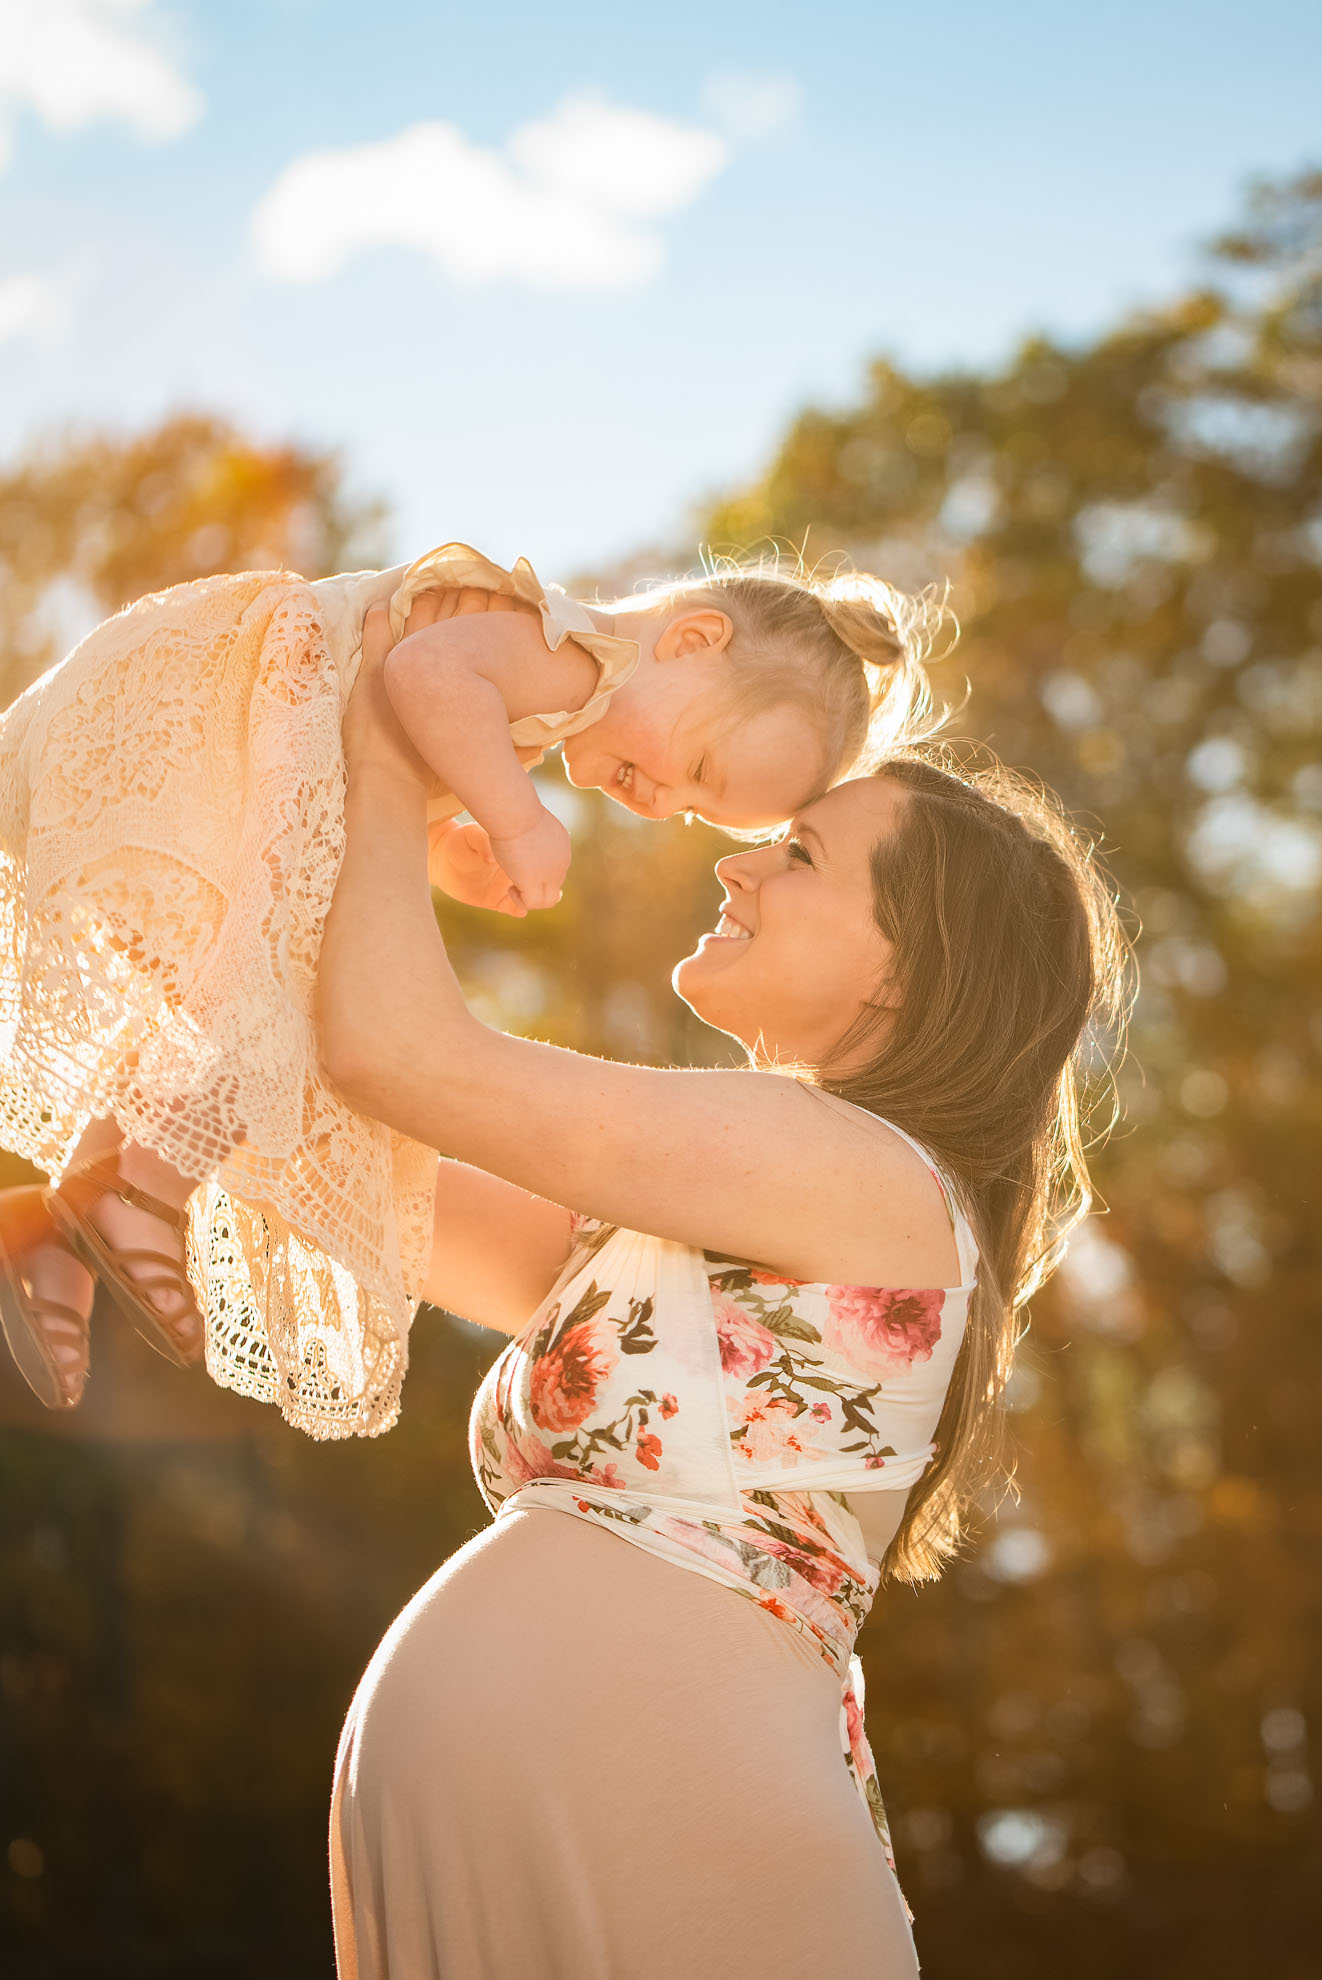 Bromley Family 8 1 - Maternity Photography